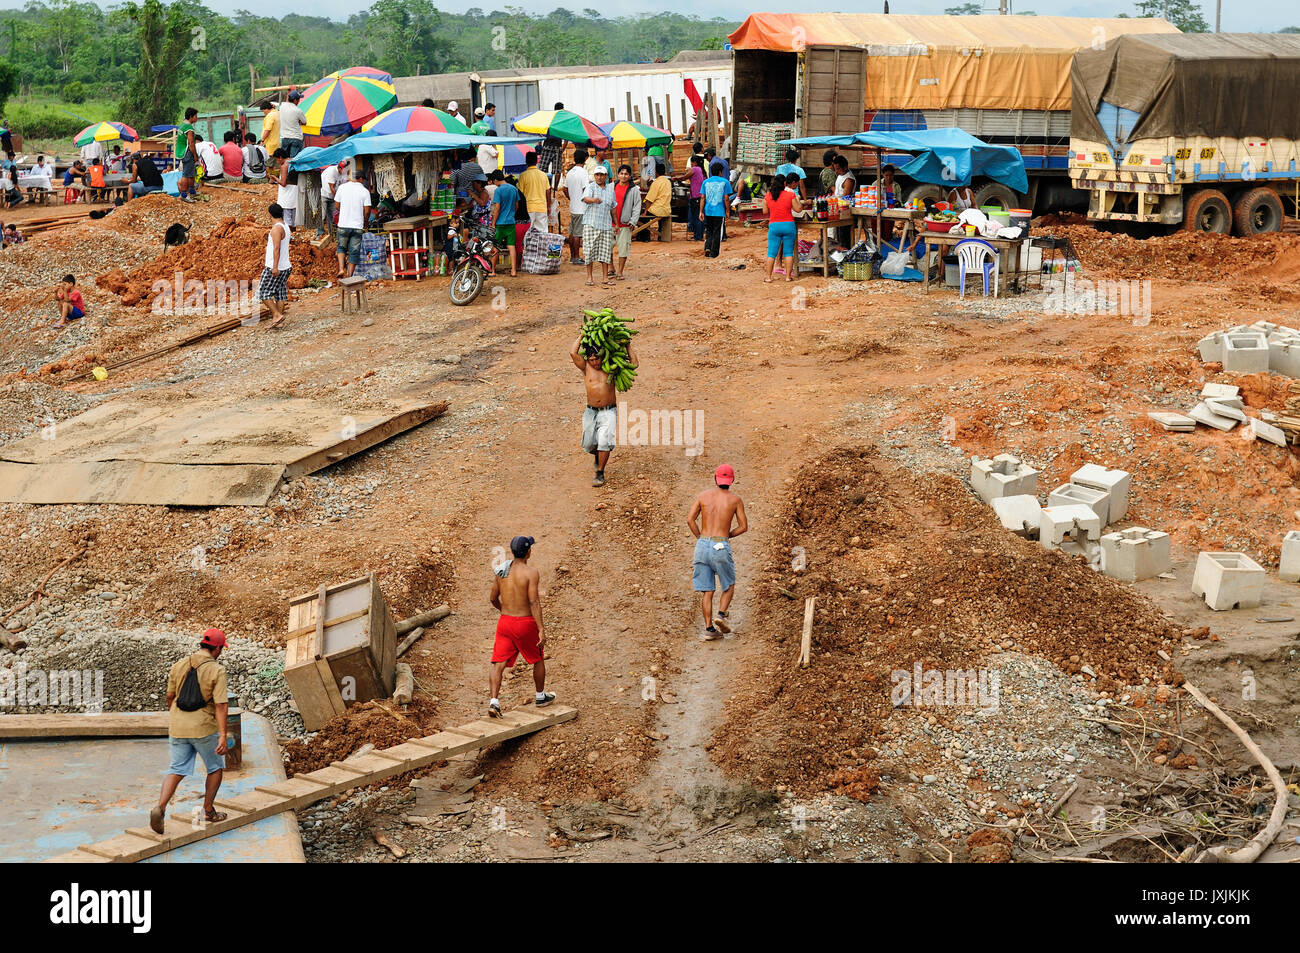 PERU, AMAZONIA - JUNE 02: Loading of the ship in a river port on the bank of the Amazon river in June 02, 2012 Stock Photo